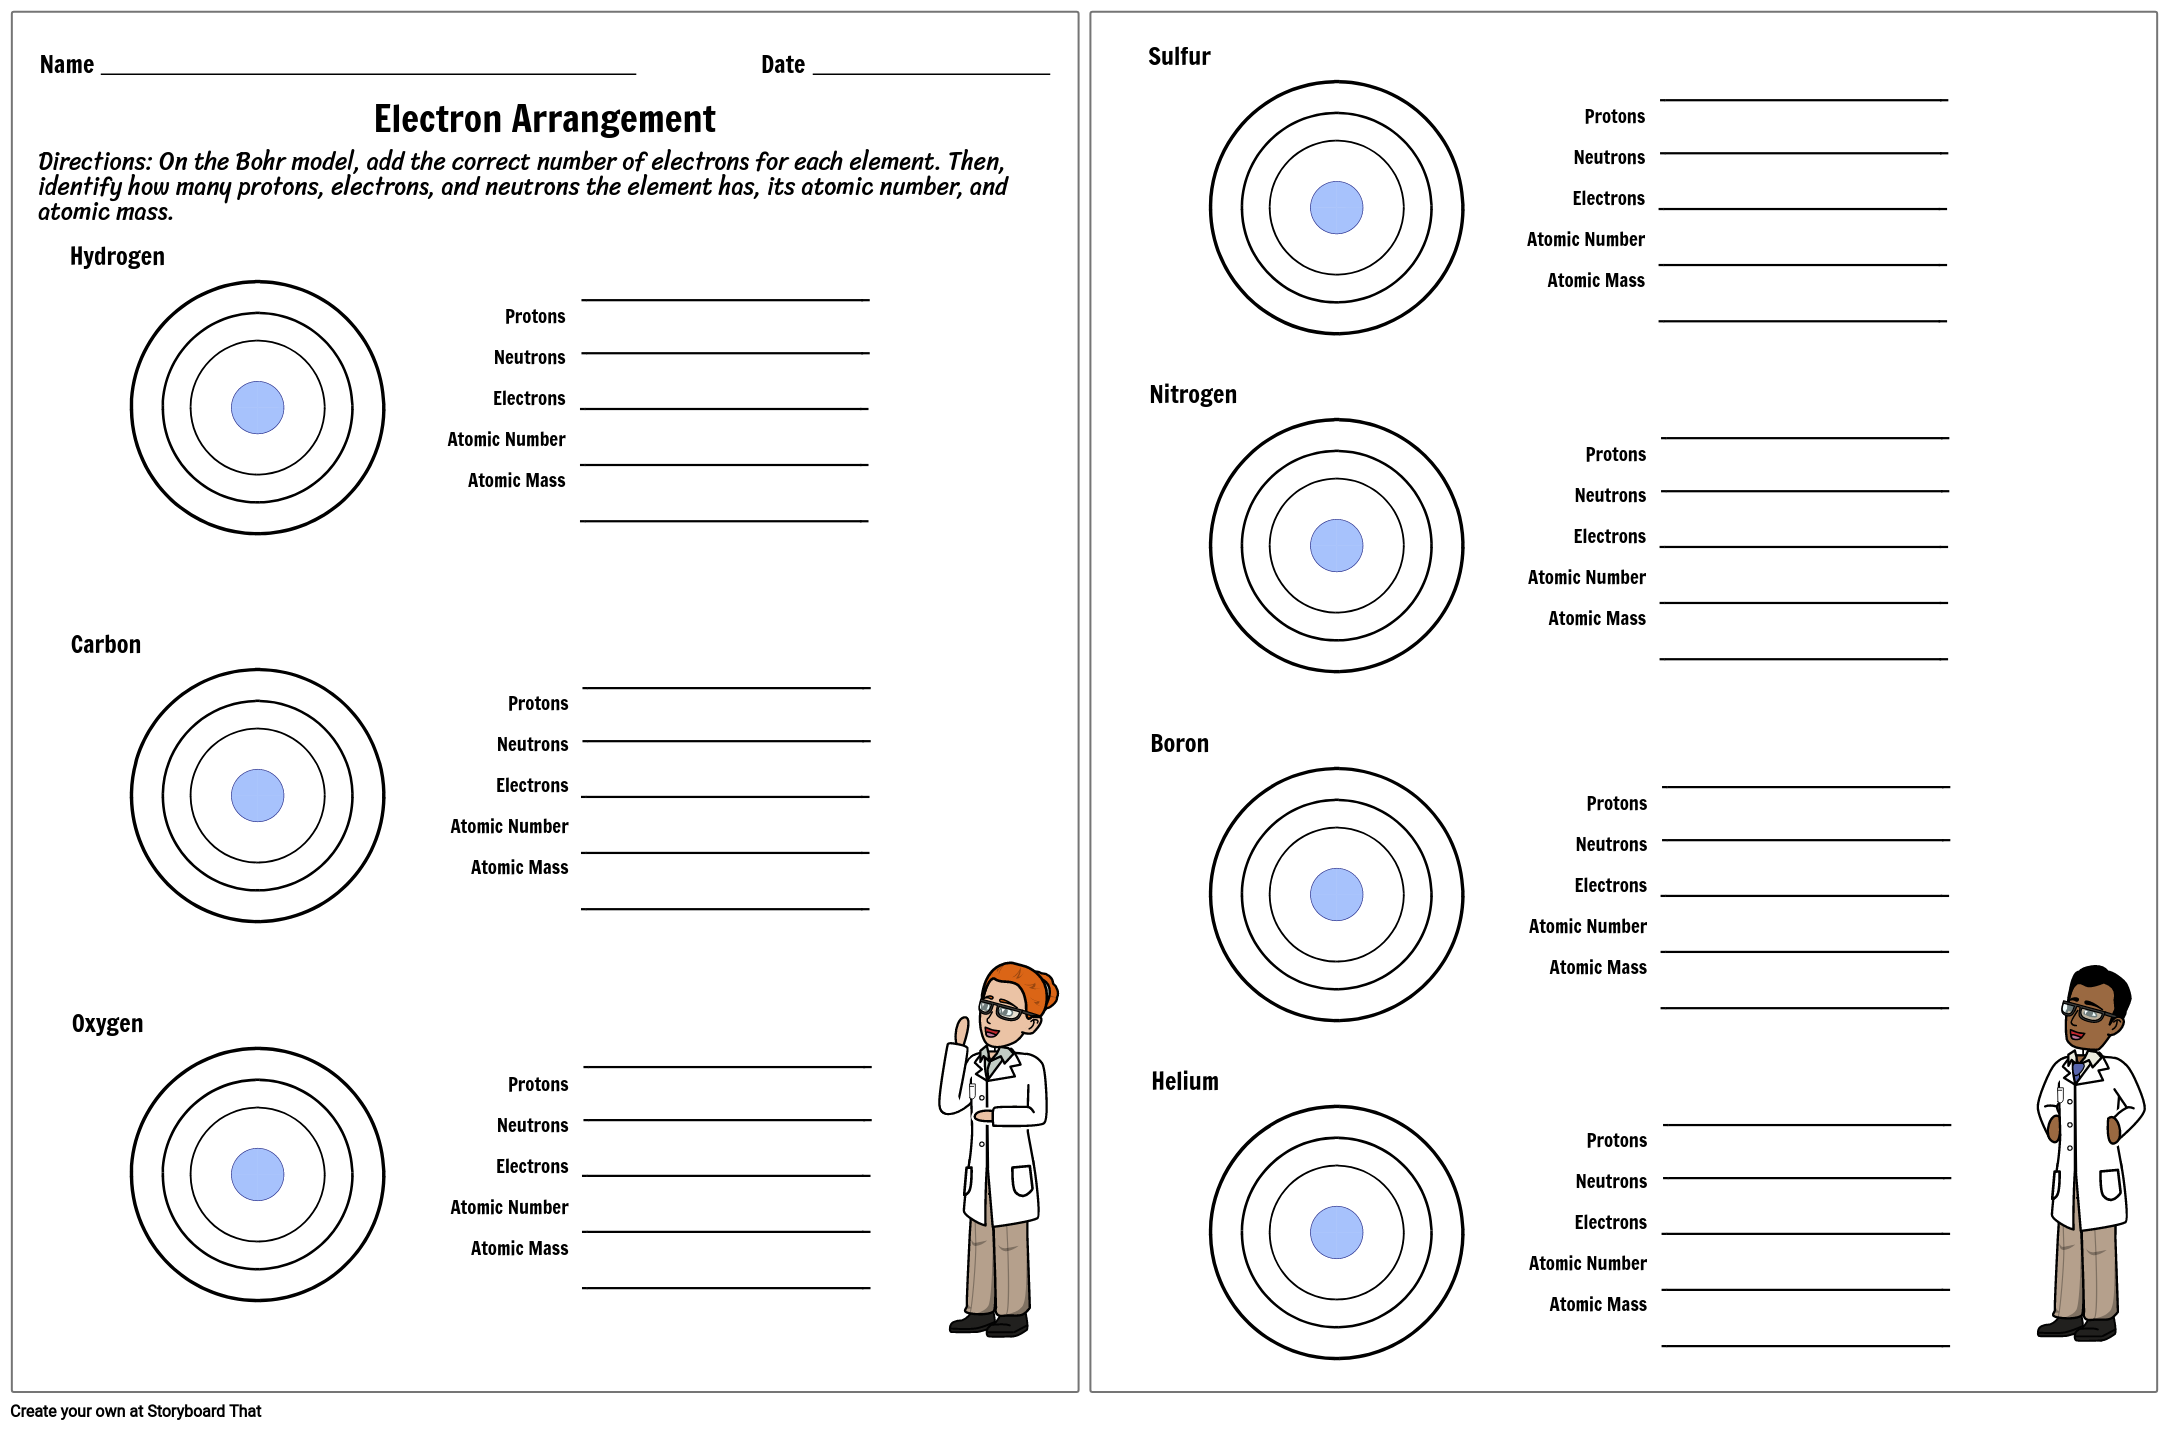 Electron Arrangement Worksheet Storyboard by kristen Within Protons Neutrons And Electrons Worksheet